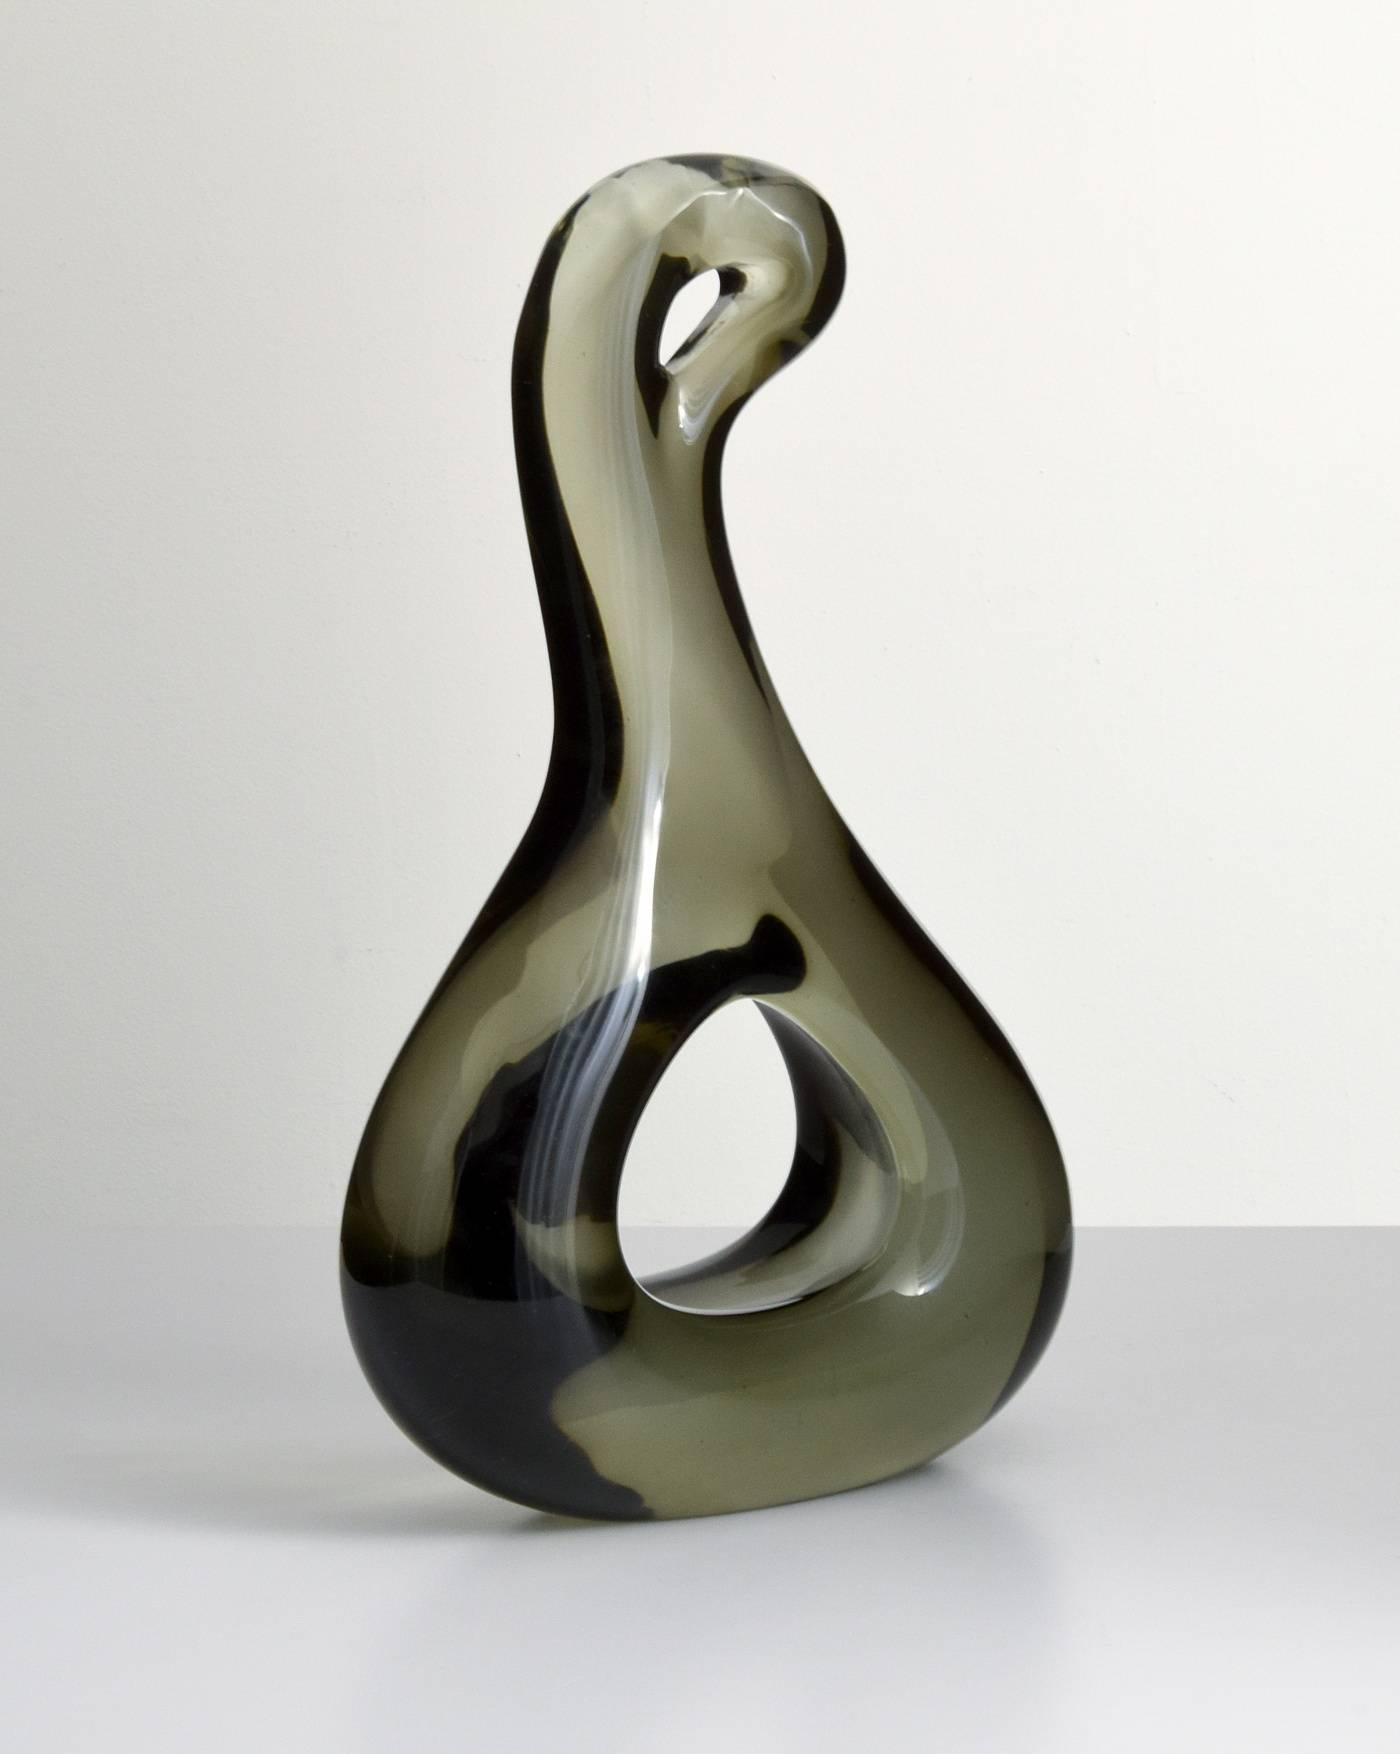 Large blown glass sculpture by Luciano Gaspari for Salviati.